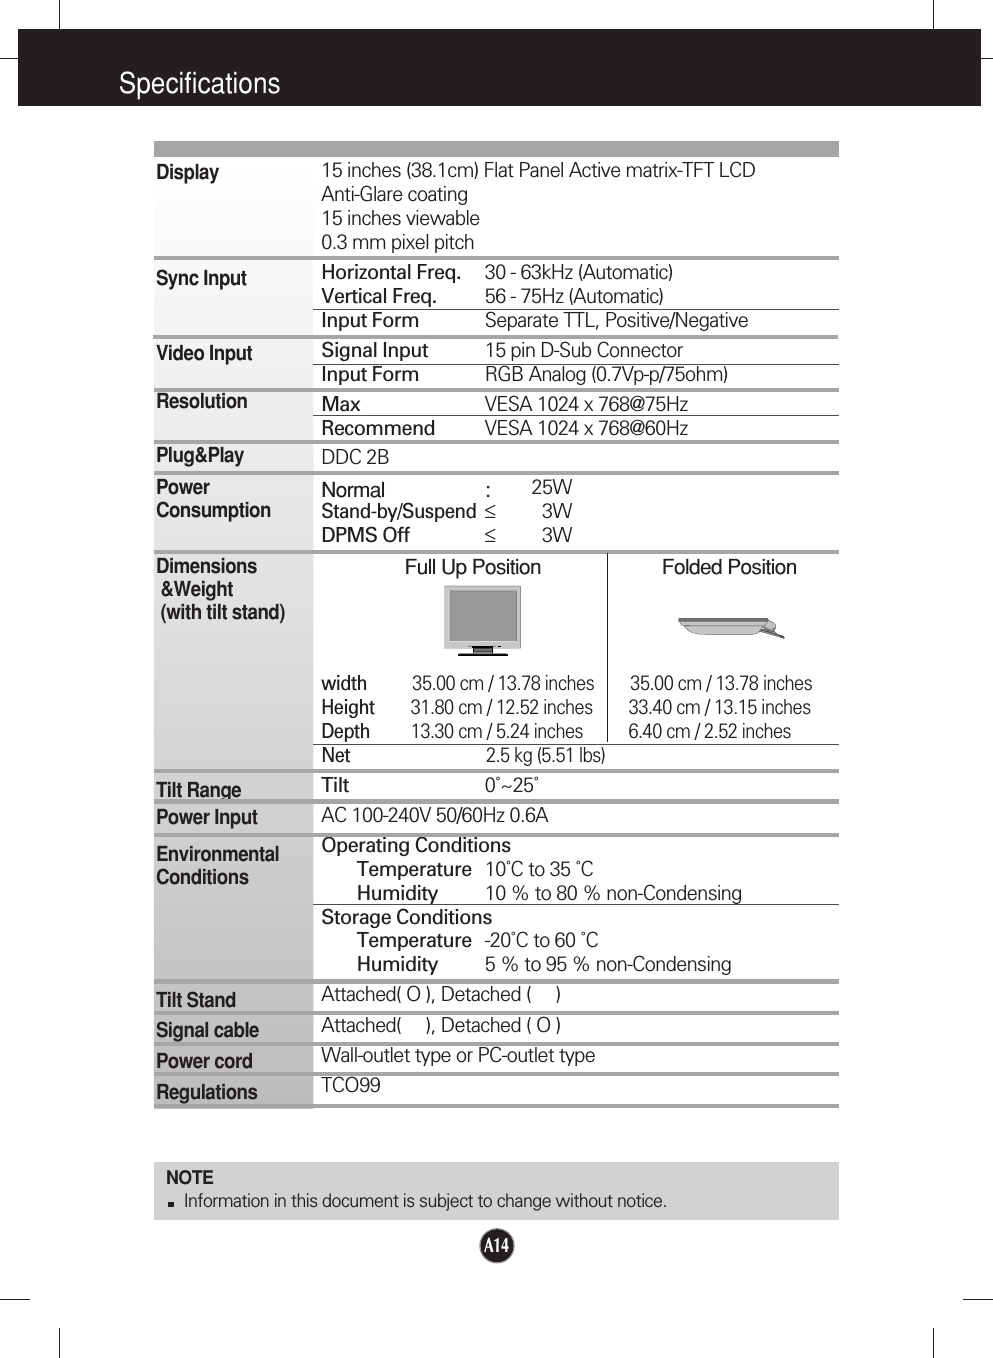 A14SpecificationsNOTEInformation in this document is subject to change without notice.15 inches (38.1cm) Flat Panel Active matrix-TFT LCD Anti-Glare coating15 inches viewable0.3 mm pixel pitchHorizontal Freq. 30 - 63kHz (Automatic)Vertical Freq. 56 - 75Hz (Automatic)Input Form Separate TTL, Positive/NegativeSignal Input 15 pin D-Sub ConnectorInput Form RGB Analog (0.7Vp-p/75ohm)Max VESA 1024 x 768@75Hz Recommend VESA 1024 x 768@60HzDDC 2BNormal :25WStand-by/Suspend≤3WDPMS Off ≤3WFull Up Position Folded Positionwidth          35.00 cm / 13.78 inches     35.00 cm / 13.78 inches Height        31.80 cm / 12.52 inches      33.40 cm / 13.15 inchesDepth         13.30 cm / 5.24 inches          6.40 cm / 2.52 inchesNet 2.5 kg (5.51 lbs)                      Tilt 0˚~25˚AC 100-240V 50/60Hz 0.6AOperating ConditionsTemperature 10˚C to 35 ˚CHumidity 10 % to 80 % non-CondensingStorage ConditionsTemperature -20˚C to 60 ˚CHumidity 5 % to 95 % non-CondensingAttached( O ), Detached (     )Attached(     ), Detached ( O )Wall-outlet type or PC-outlet typeTCO99DisplaySync InputVideo InputResolutionPlug&amp;PlayPowerConsumptionDimensions&amp;Weight(with tilt stand)Tilt RangePower InputEnvironmentalConditionsTilt StandSignal cablePower cord Regulations